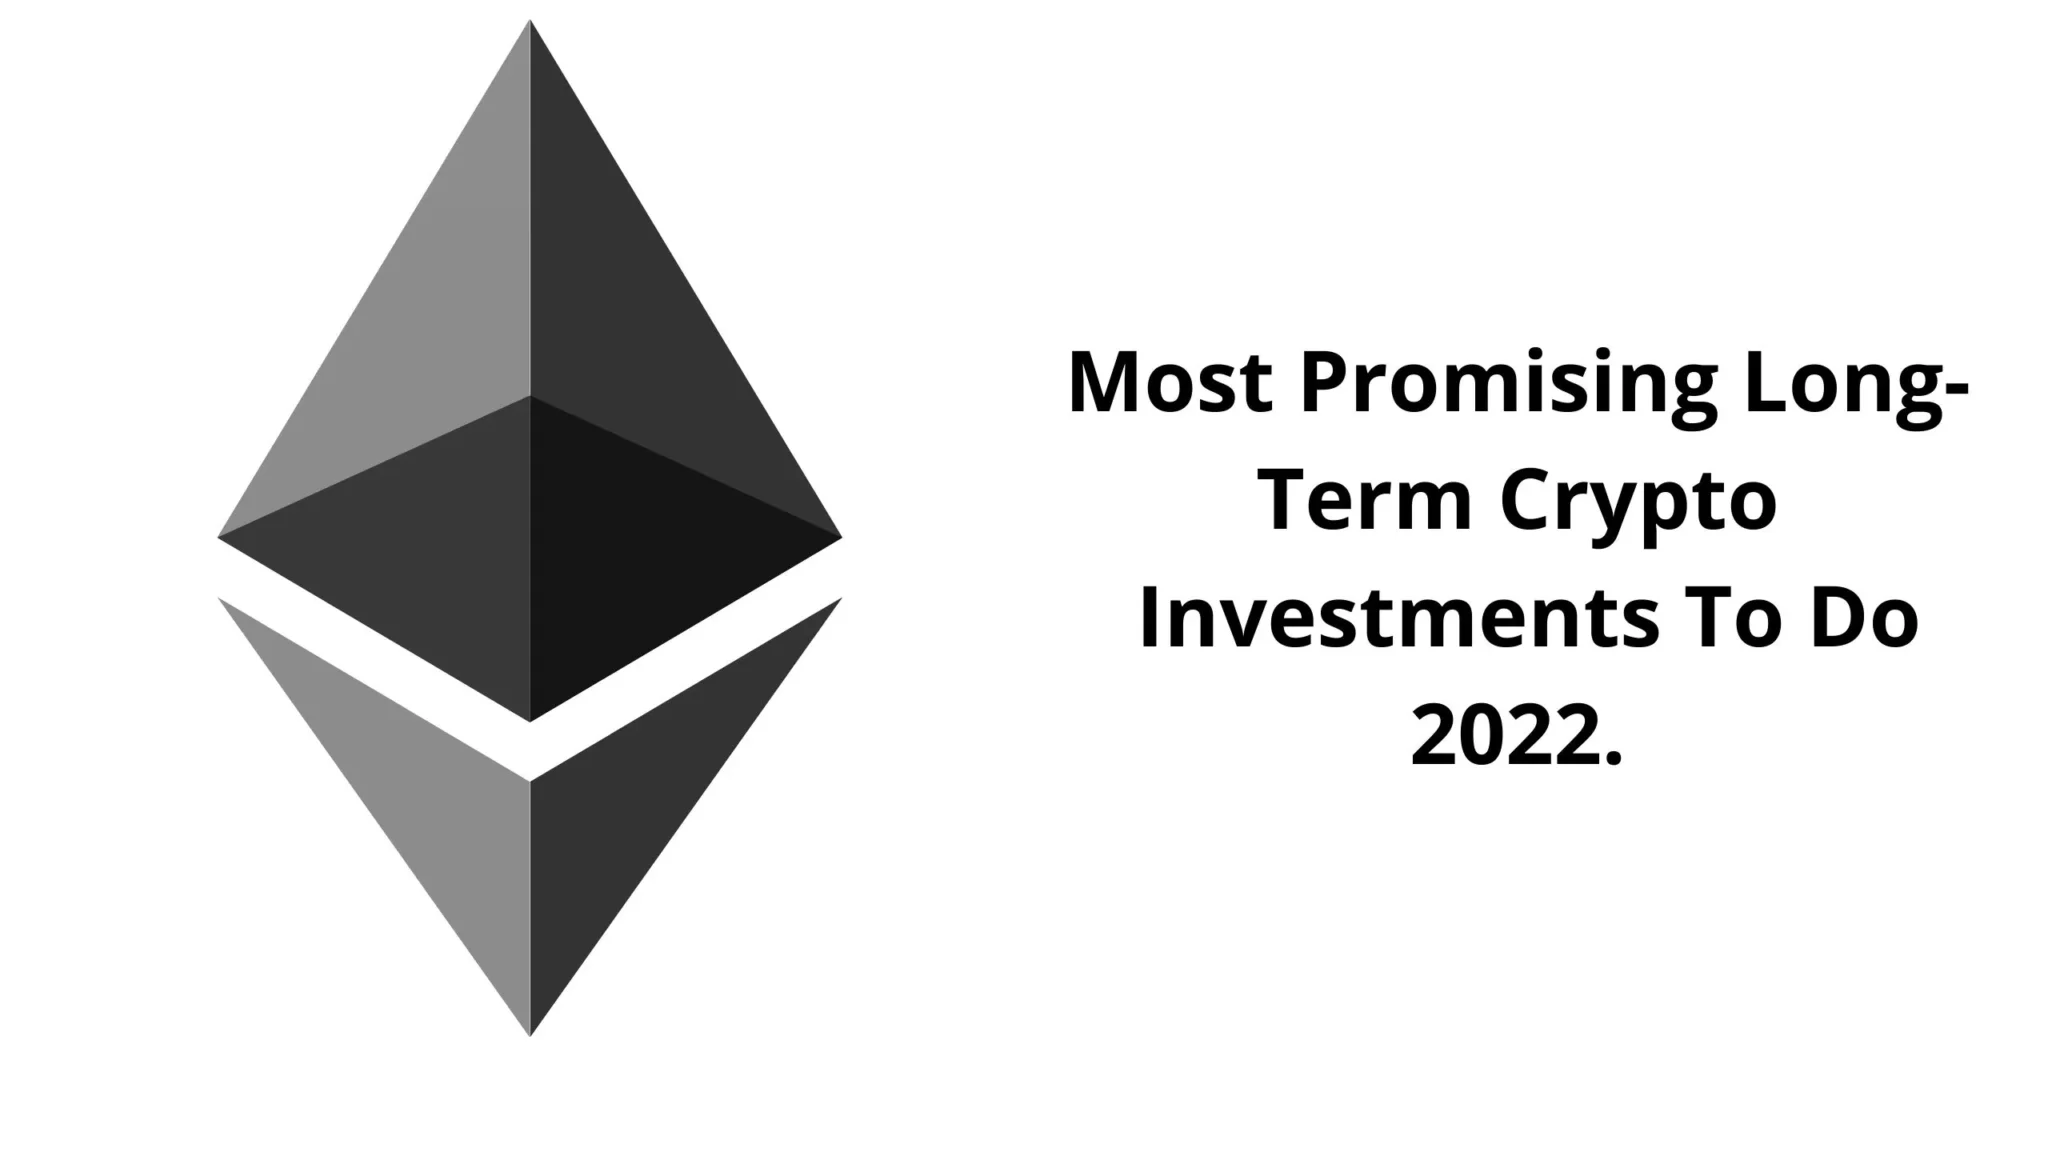 Most Promising Long-Term Crypto Investments To Do 2022